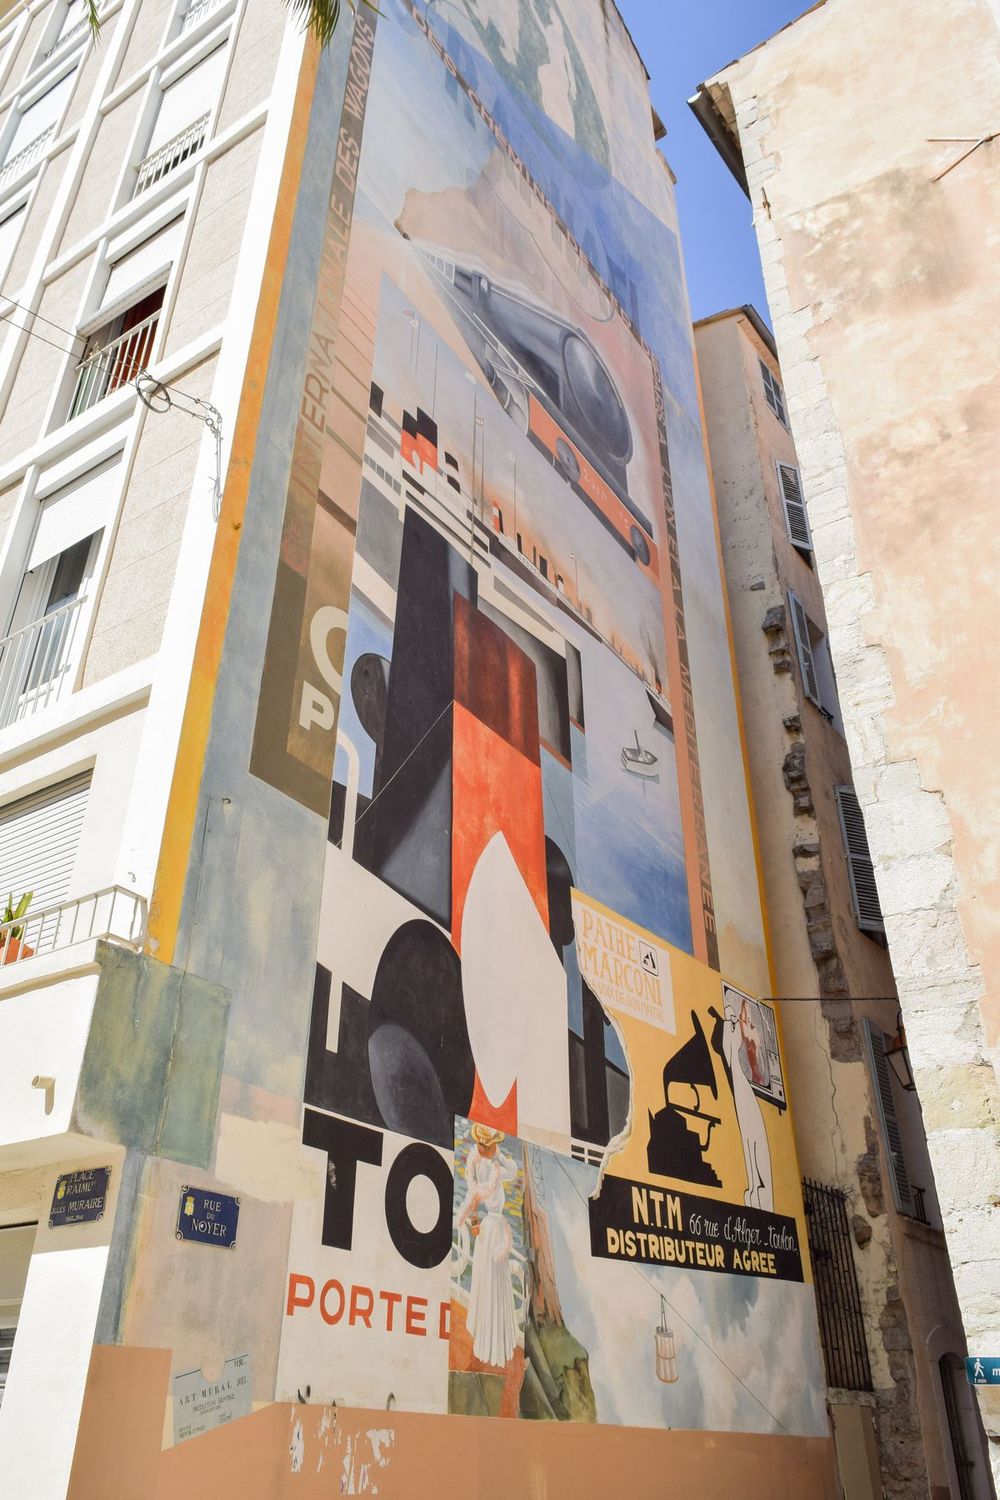 Enormous wall mural in Old Town Toulon, France